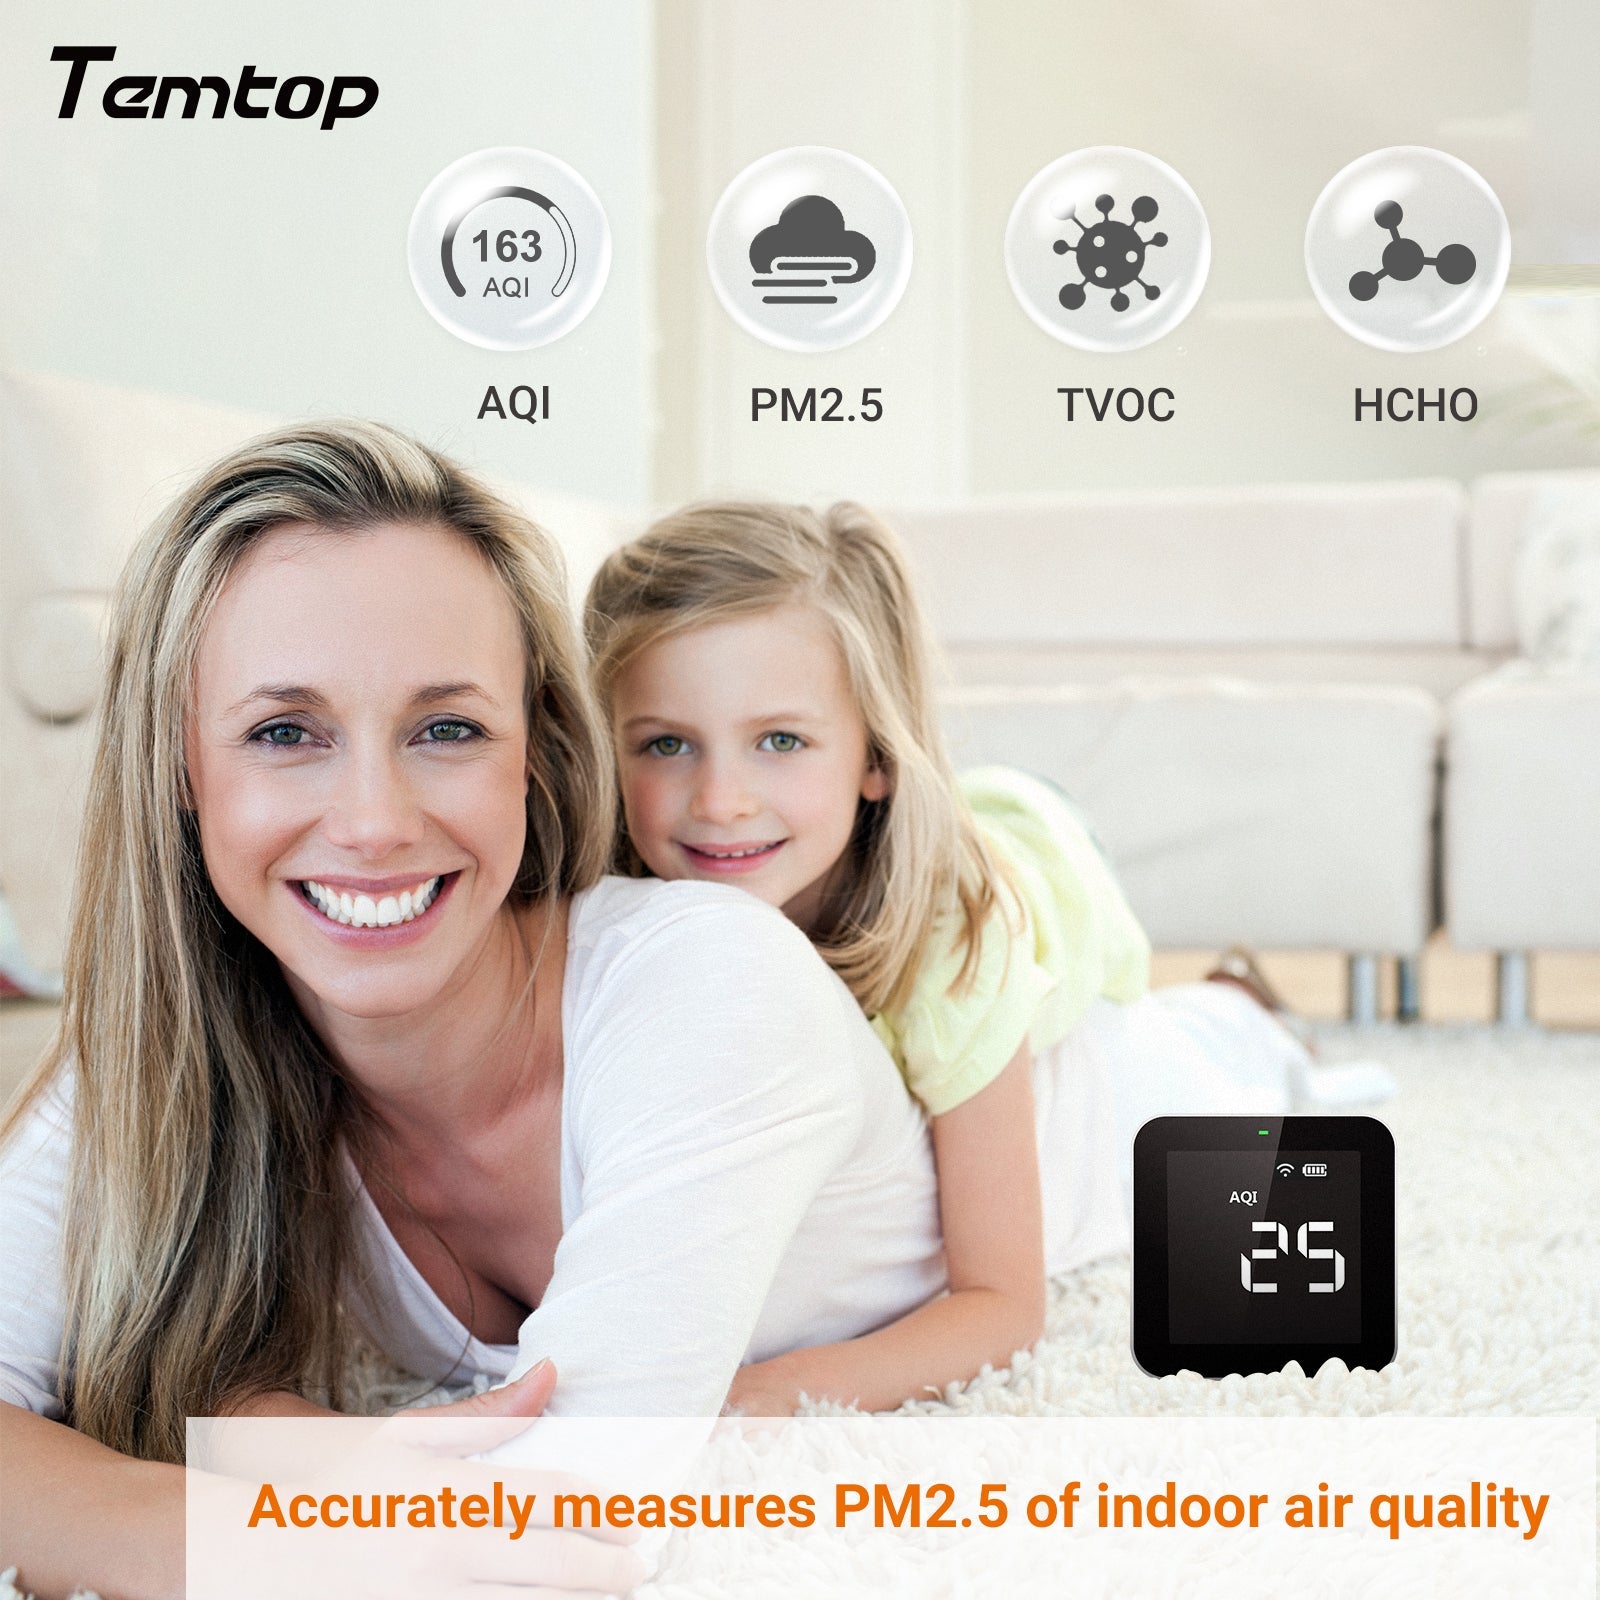 At Home Air Quality Test Kitsmart Air Quality Monitor 6-in-1 With Wifi -  Pm2.5/pm10/hcho/tvoc/co2/formaldehyde